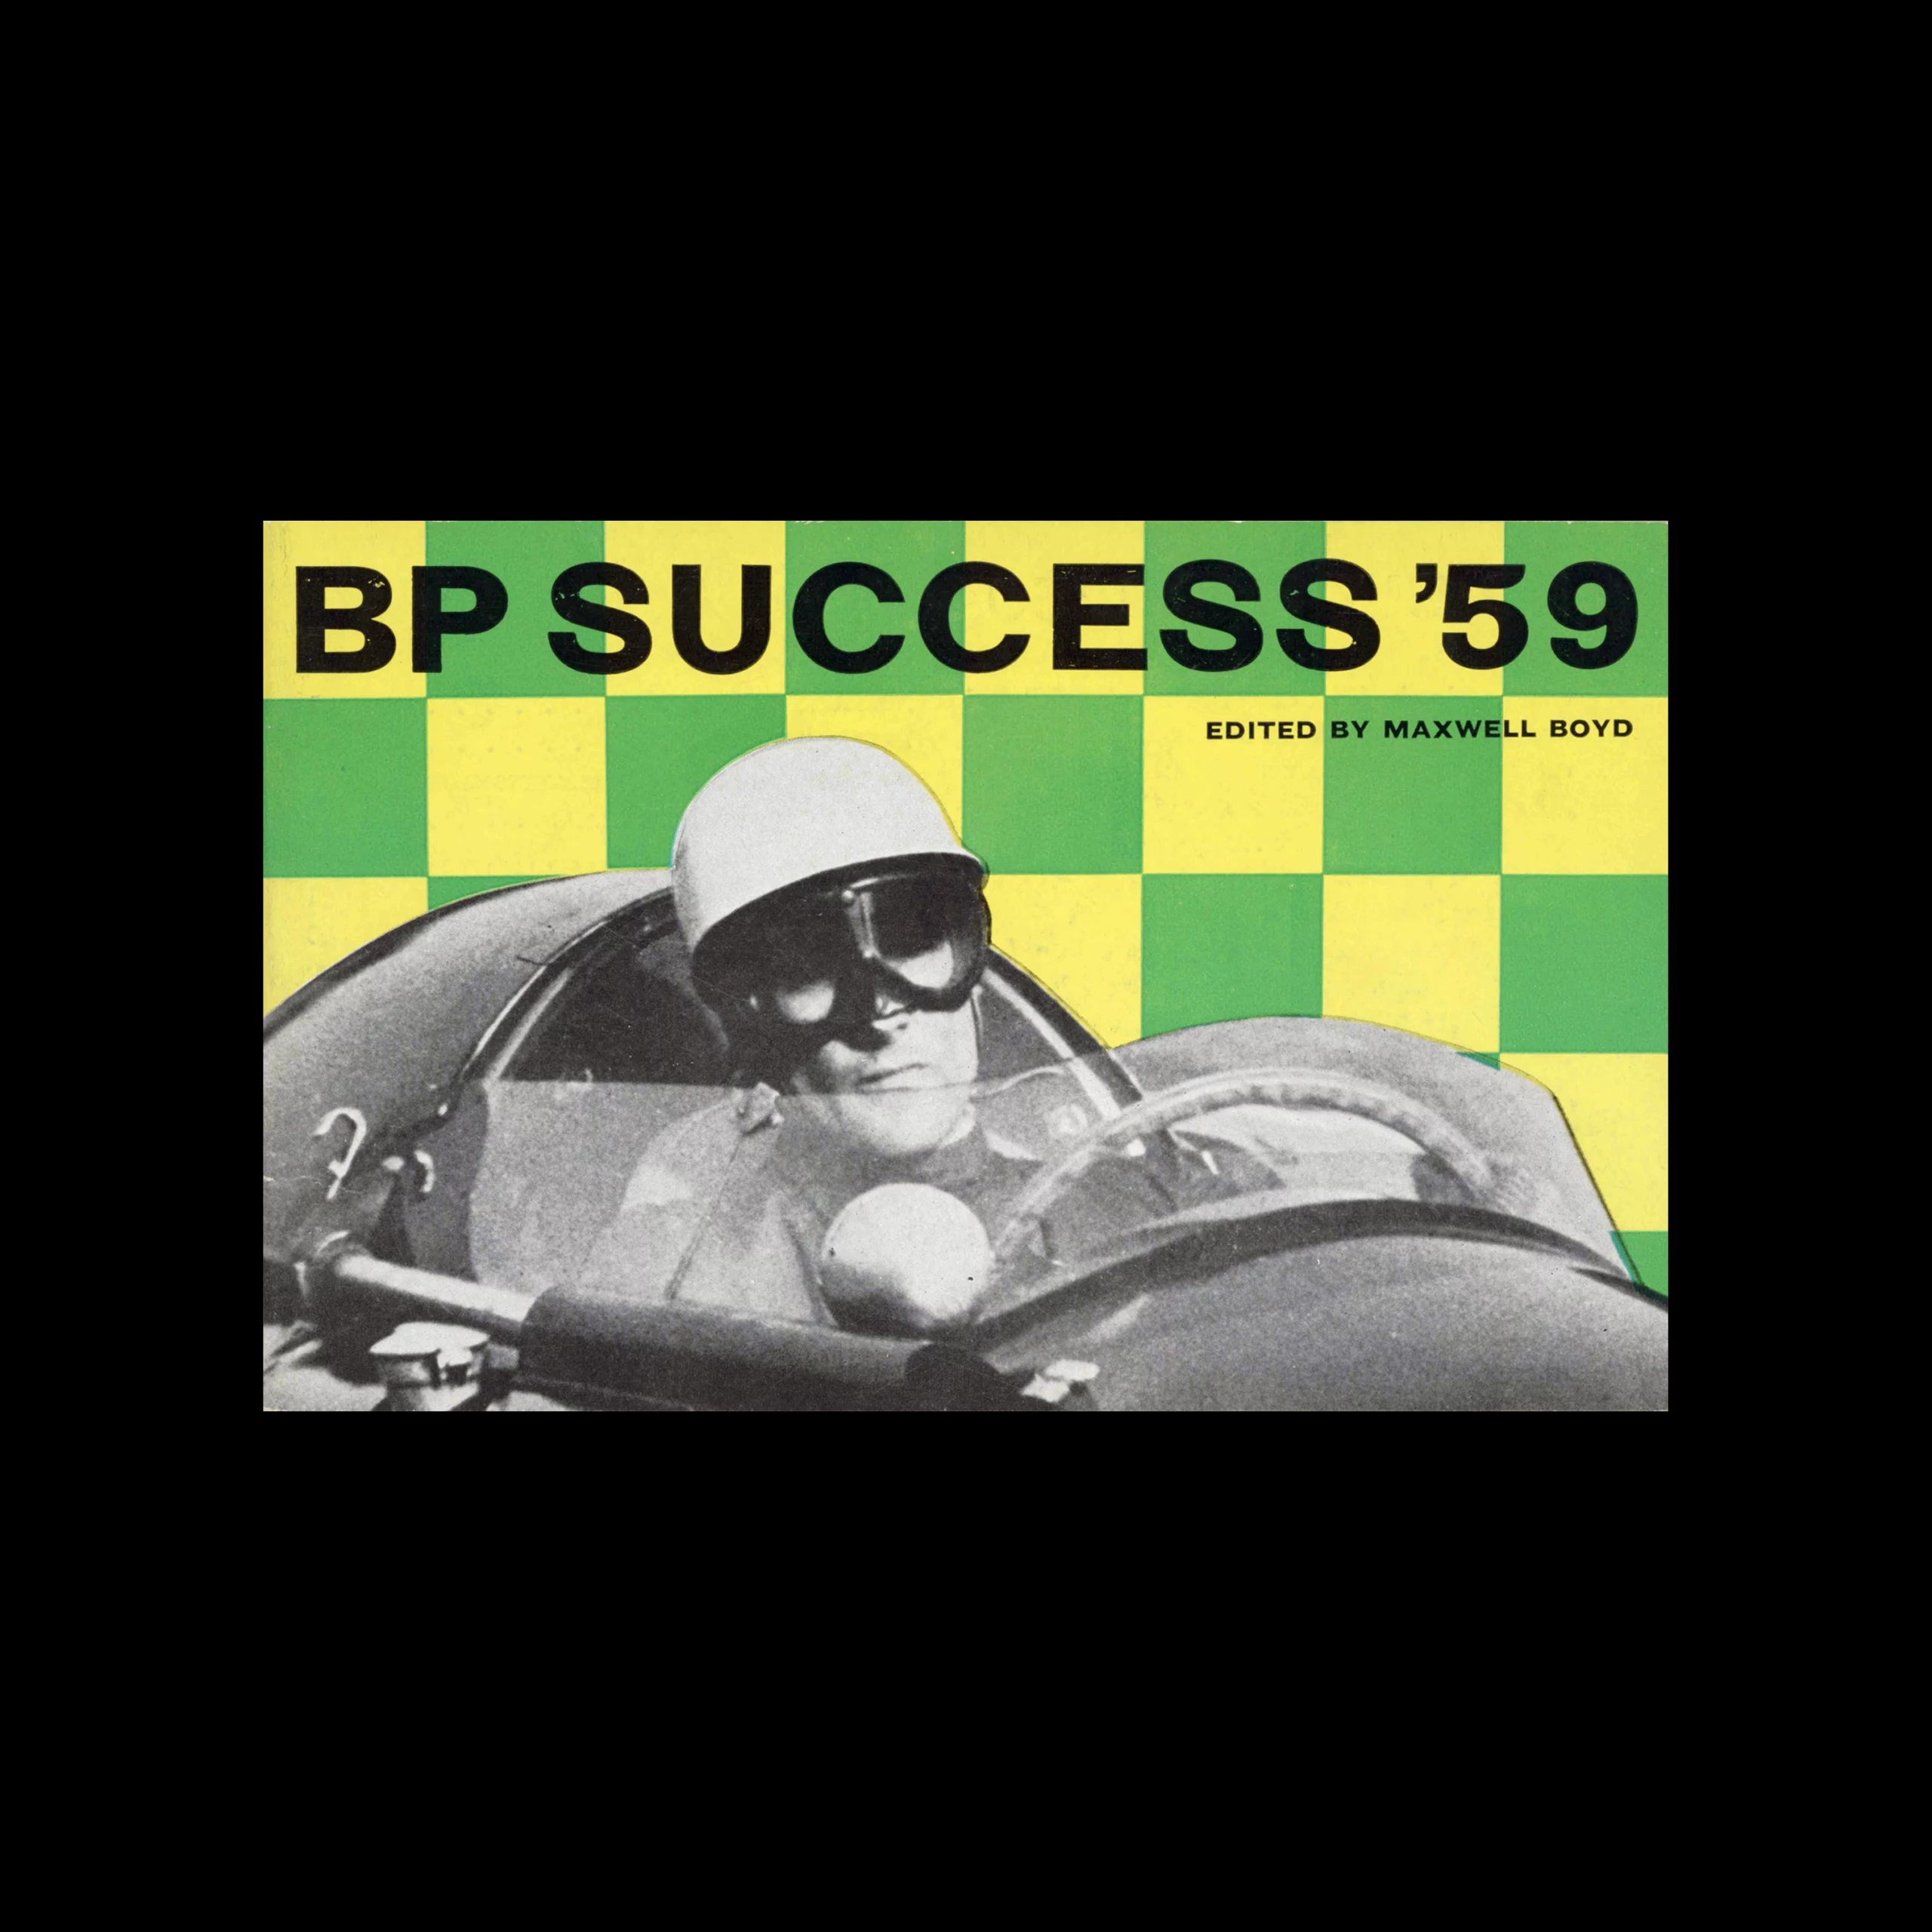 BP Success '59, BP, 1959. Designed by Newman Neame Limited